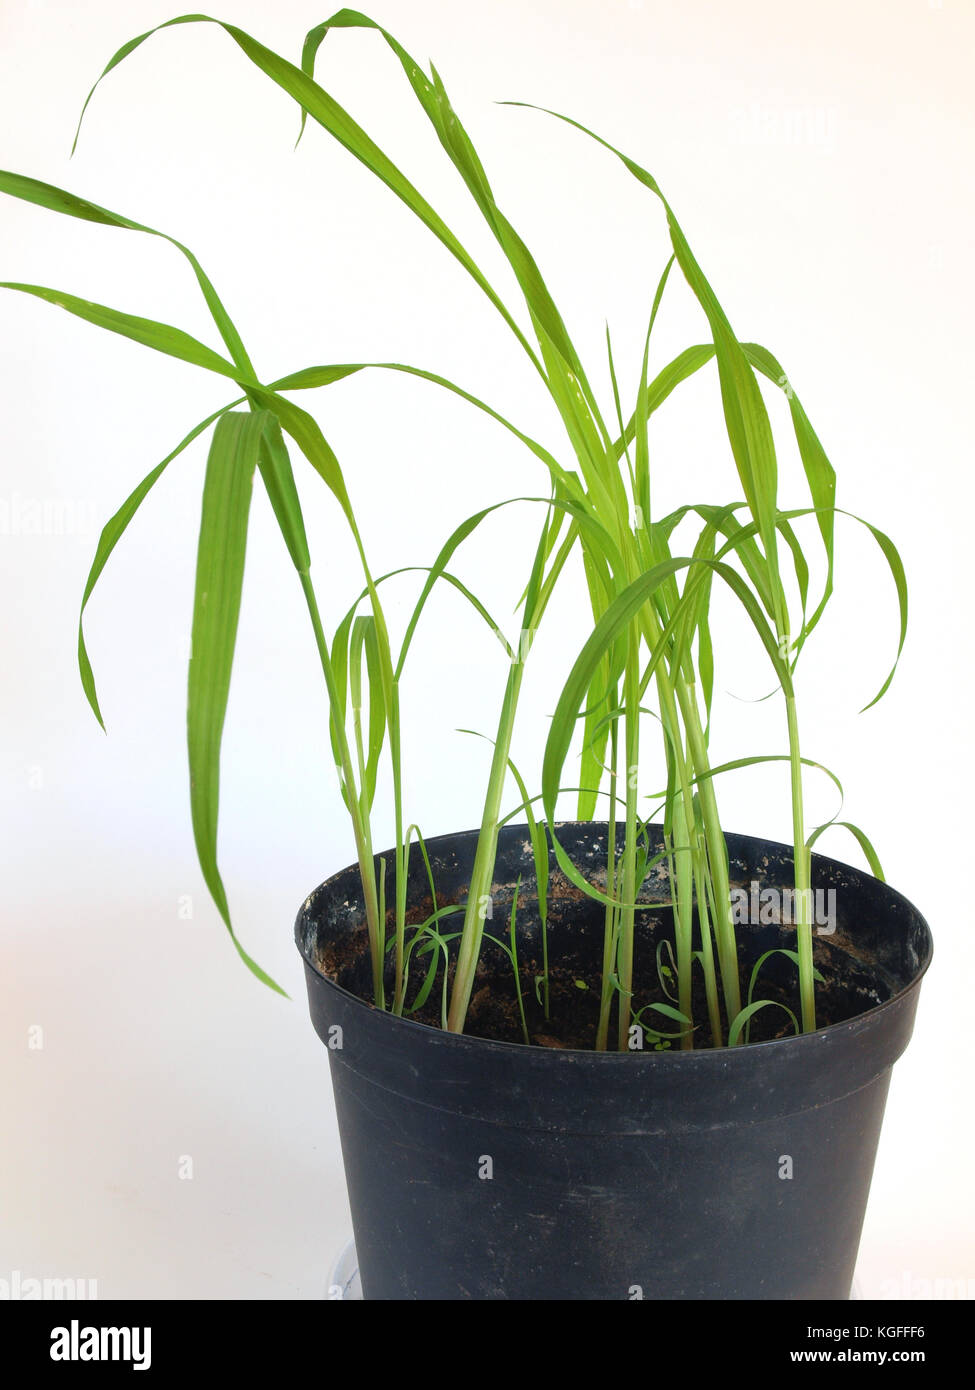 Giant moso bamboo seedlings are growing indoor in flower pot on white background close up Stock Photo